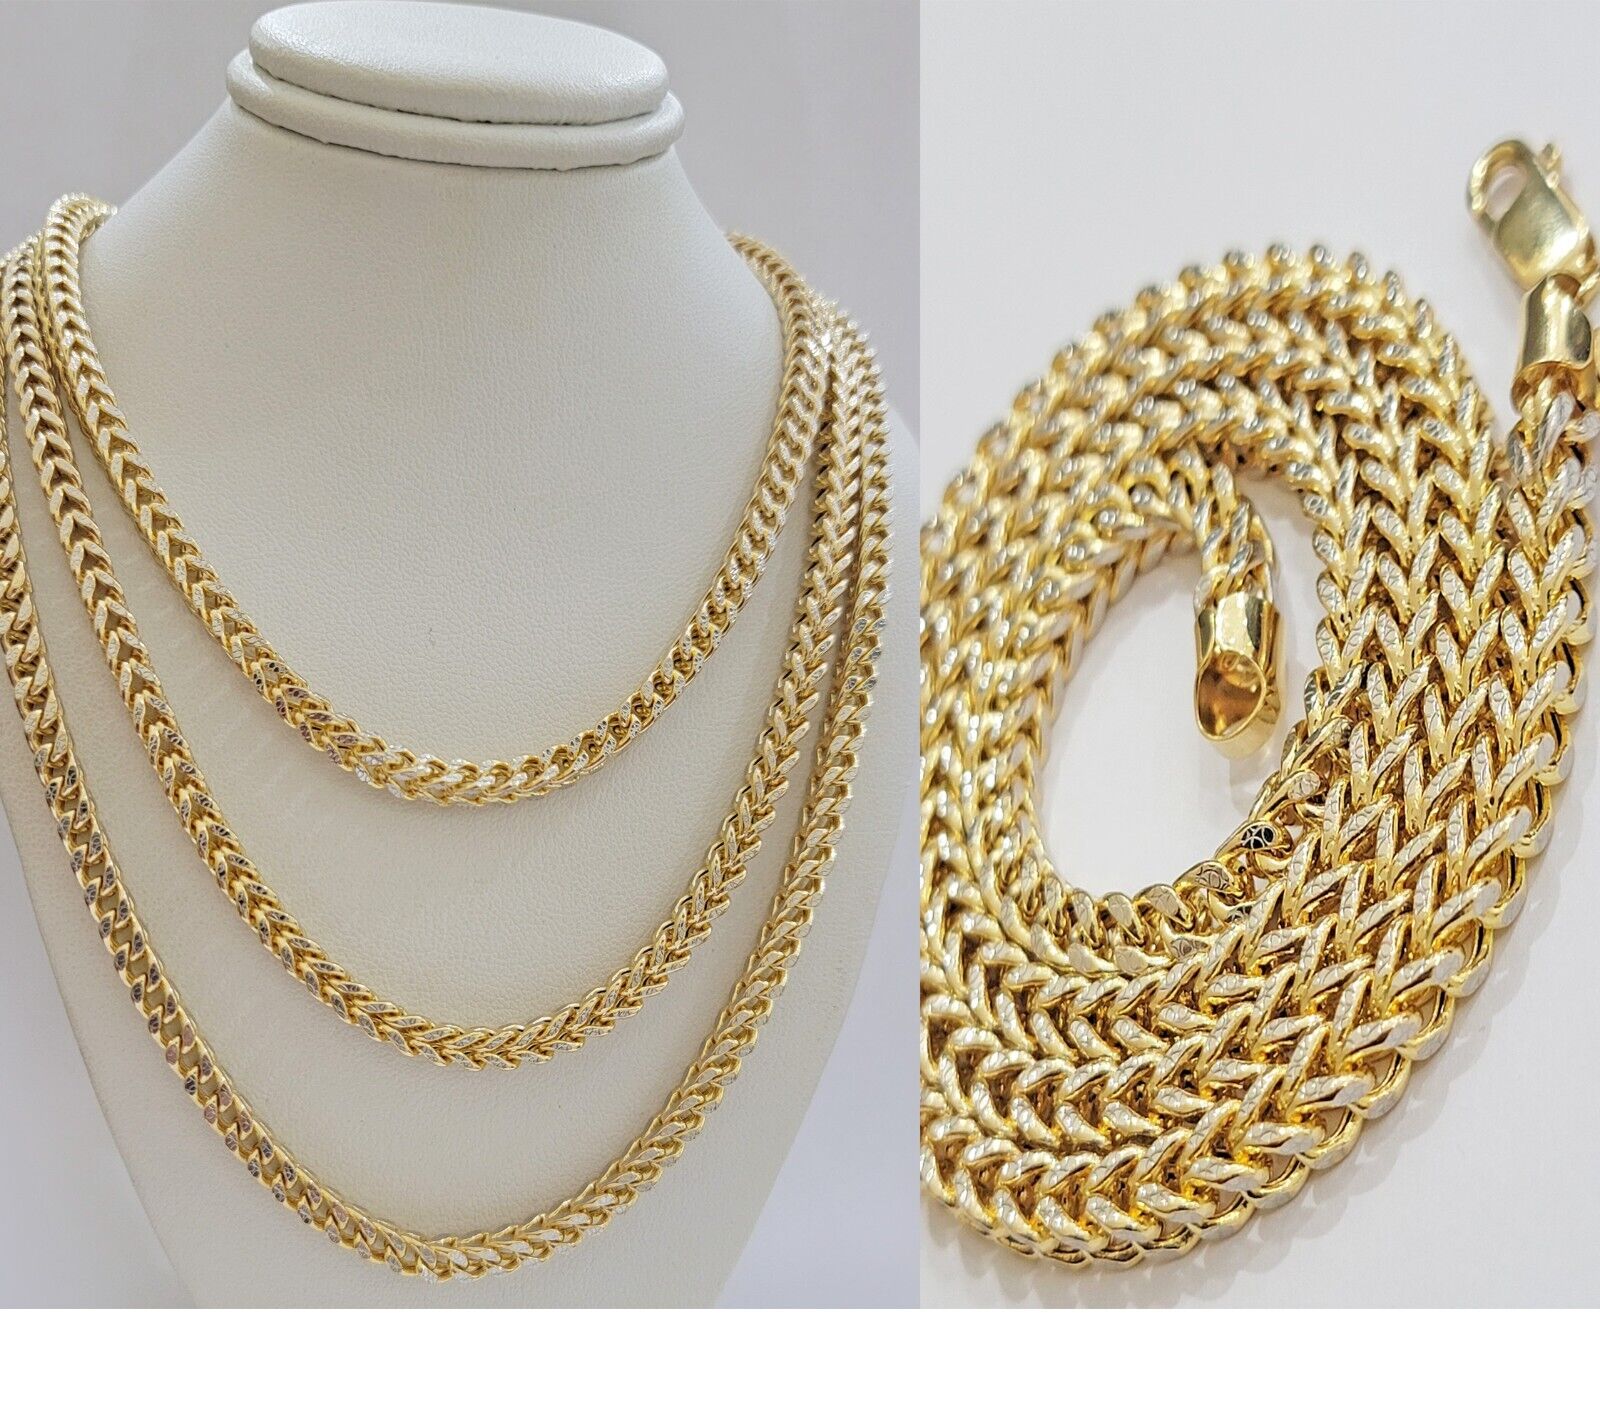 Real 14k Gold Chain Franco Necklace Diamond cuts 4mm 18"-24" 14kt Yellow Gold